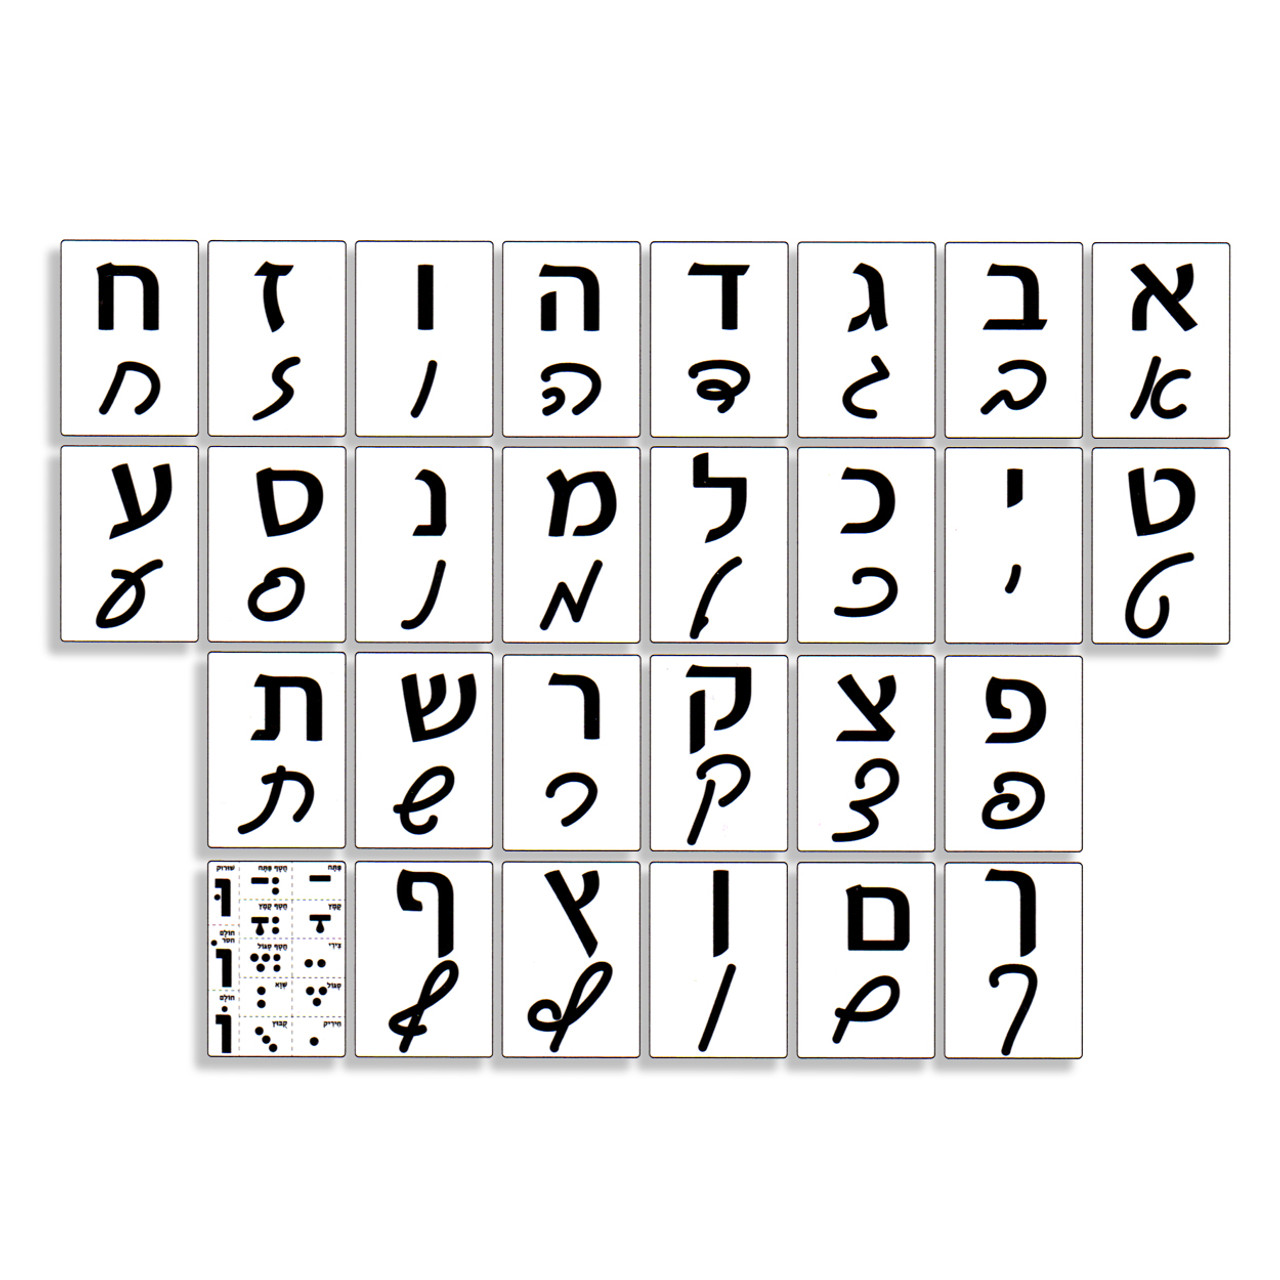 laminated-script-type-hebrew-aleph-bet-flash-cards-at-the-jewish